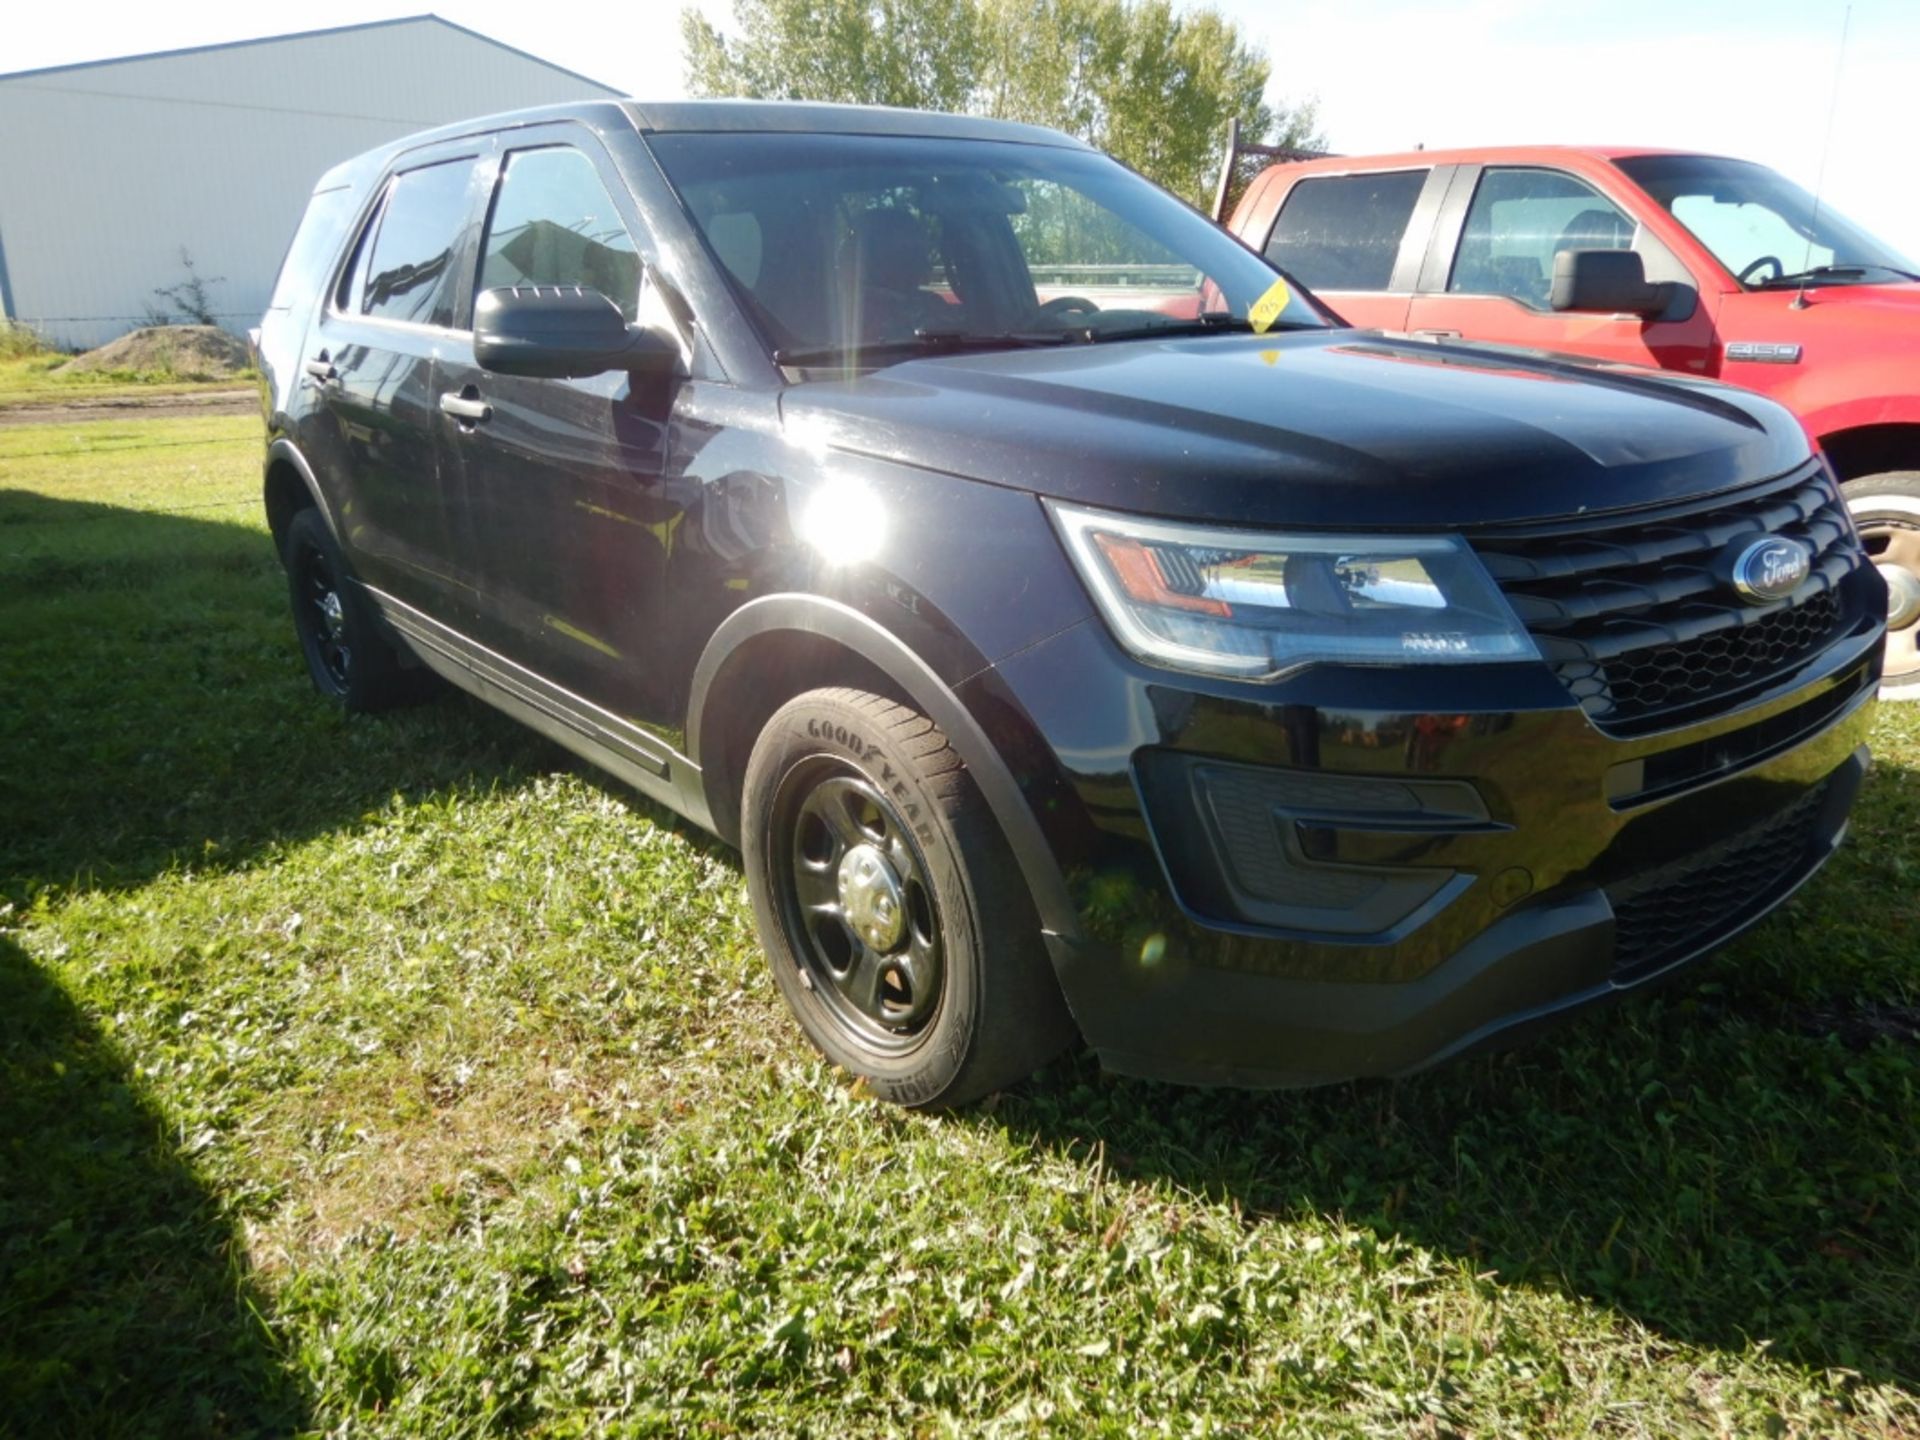 2016 FORD EXPLORER SPORT UTILITY SUV - POLICE 4WD, S/N 1FM5K8AR6GGB74955, 183,577 KM SHOWING - Image 2 of 13